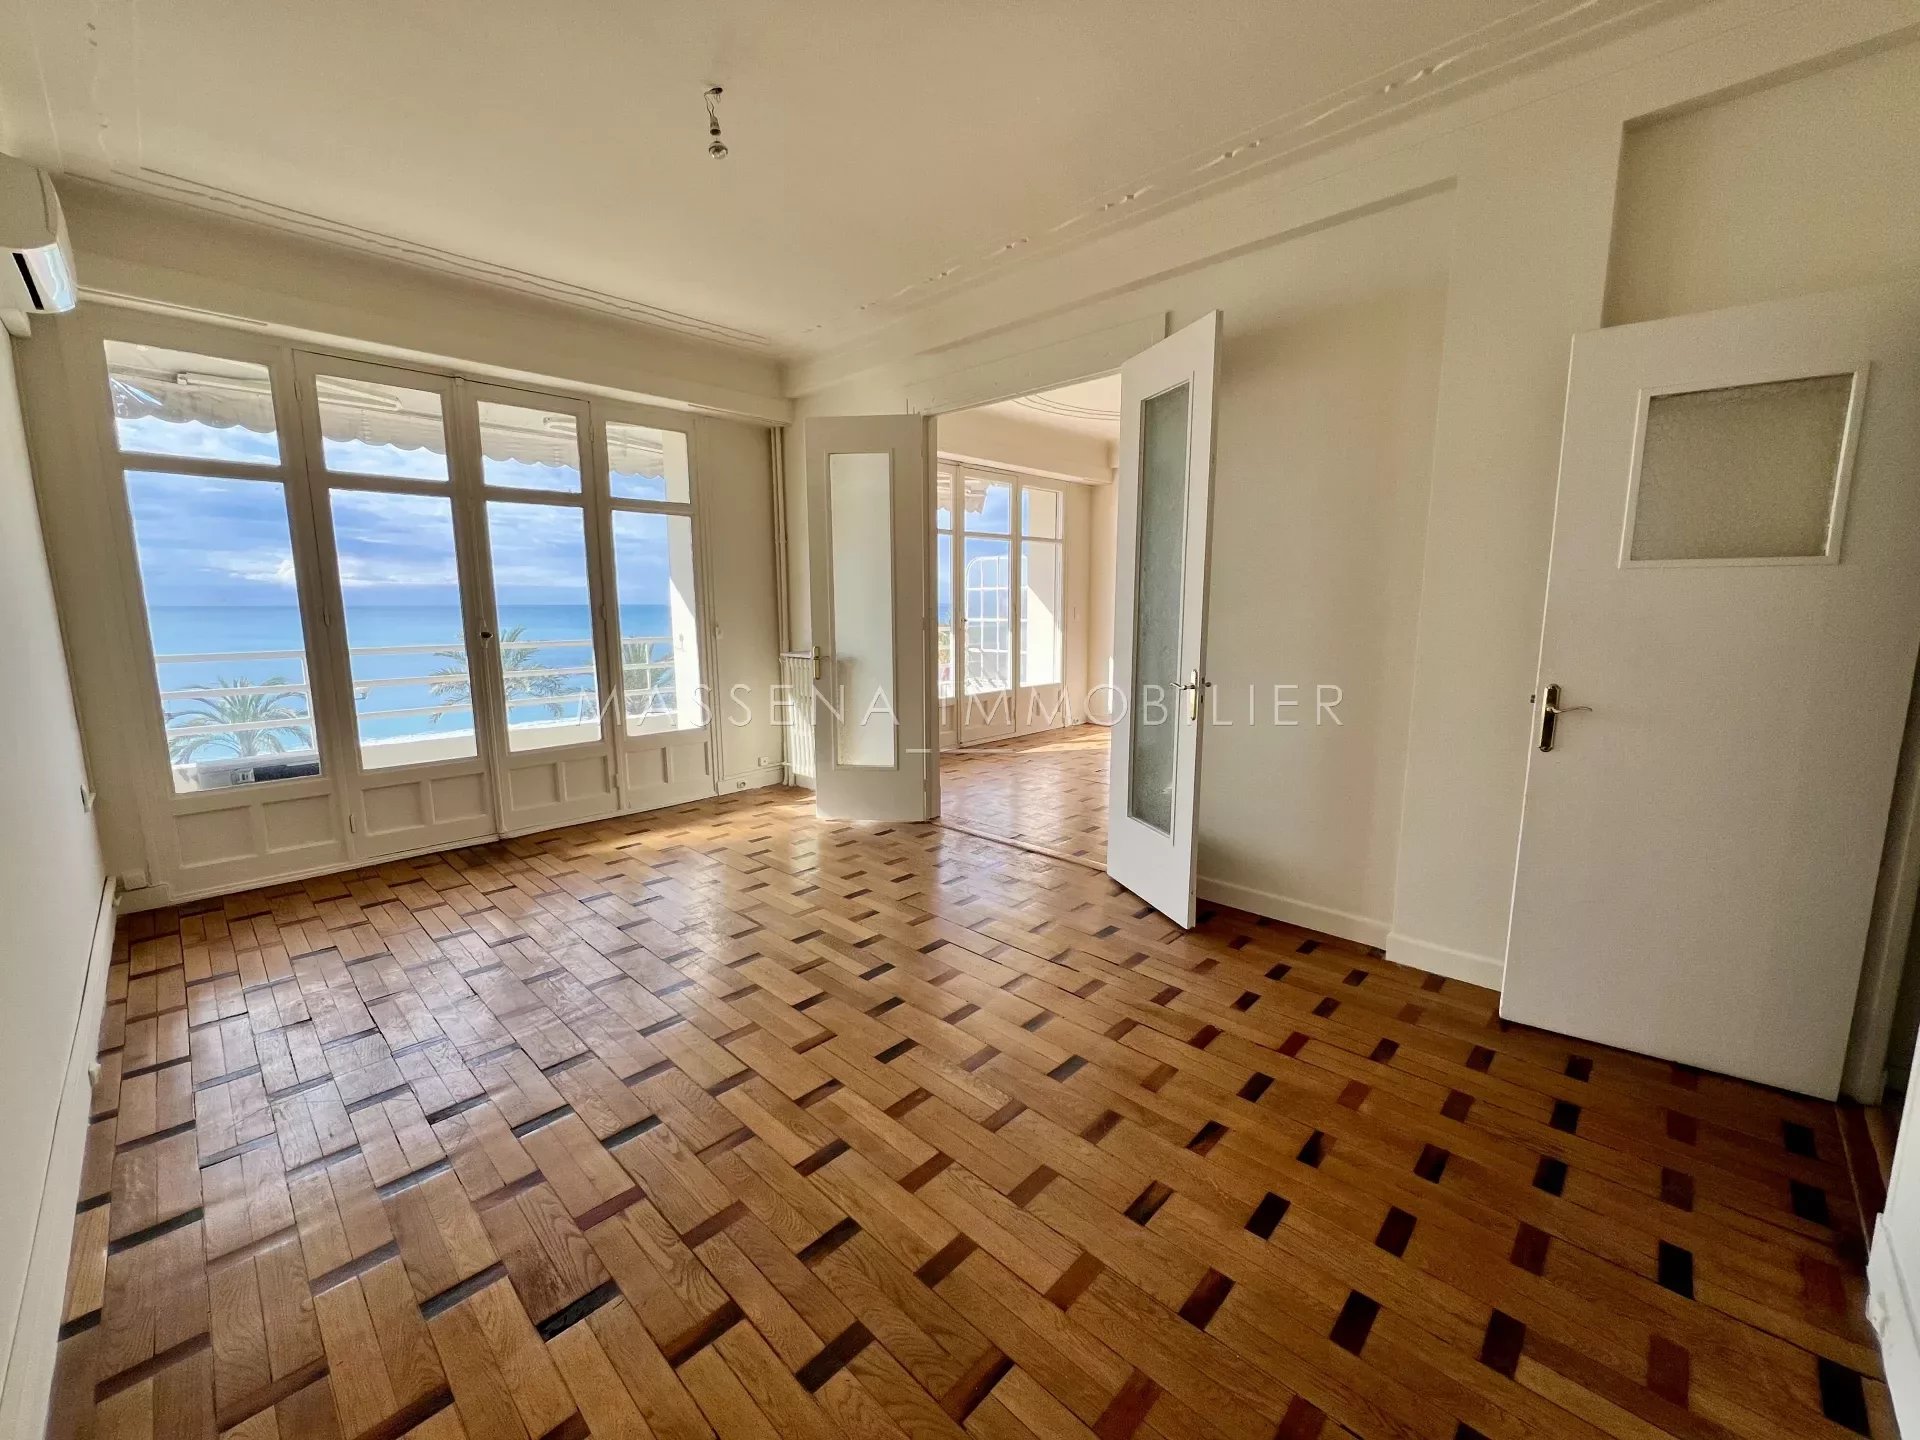 Promenade des Anglais - Spacious 3-room apartment with sea view, terrace, and garage.